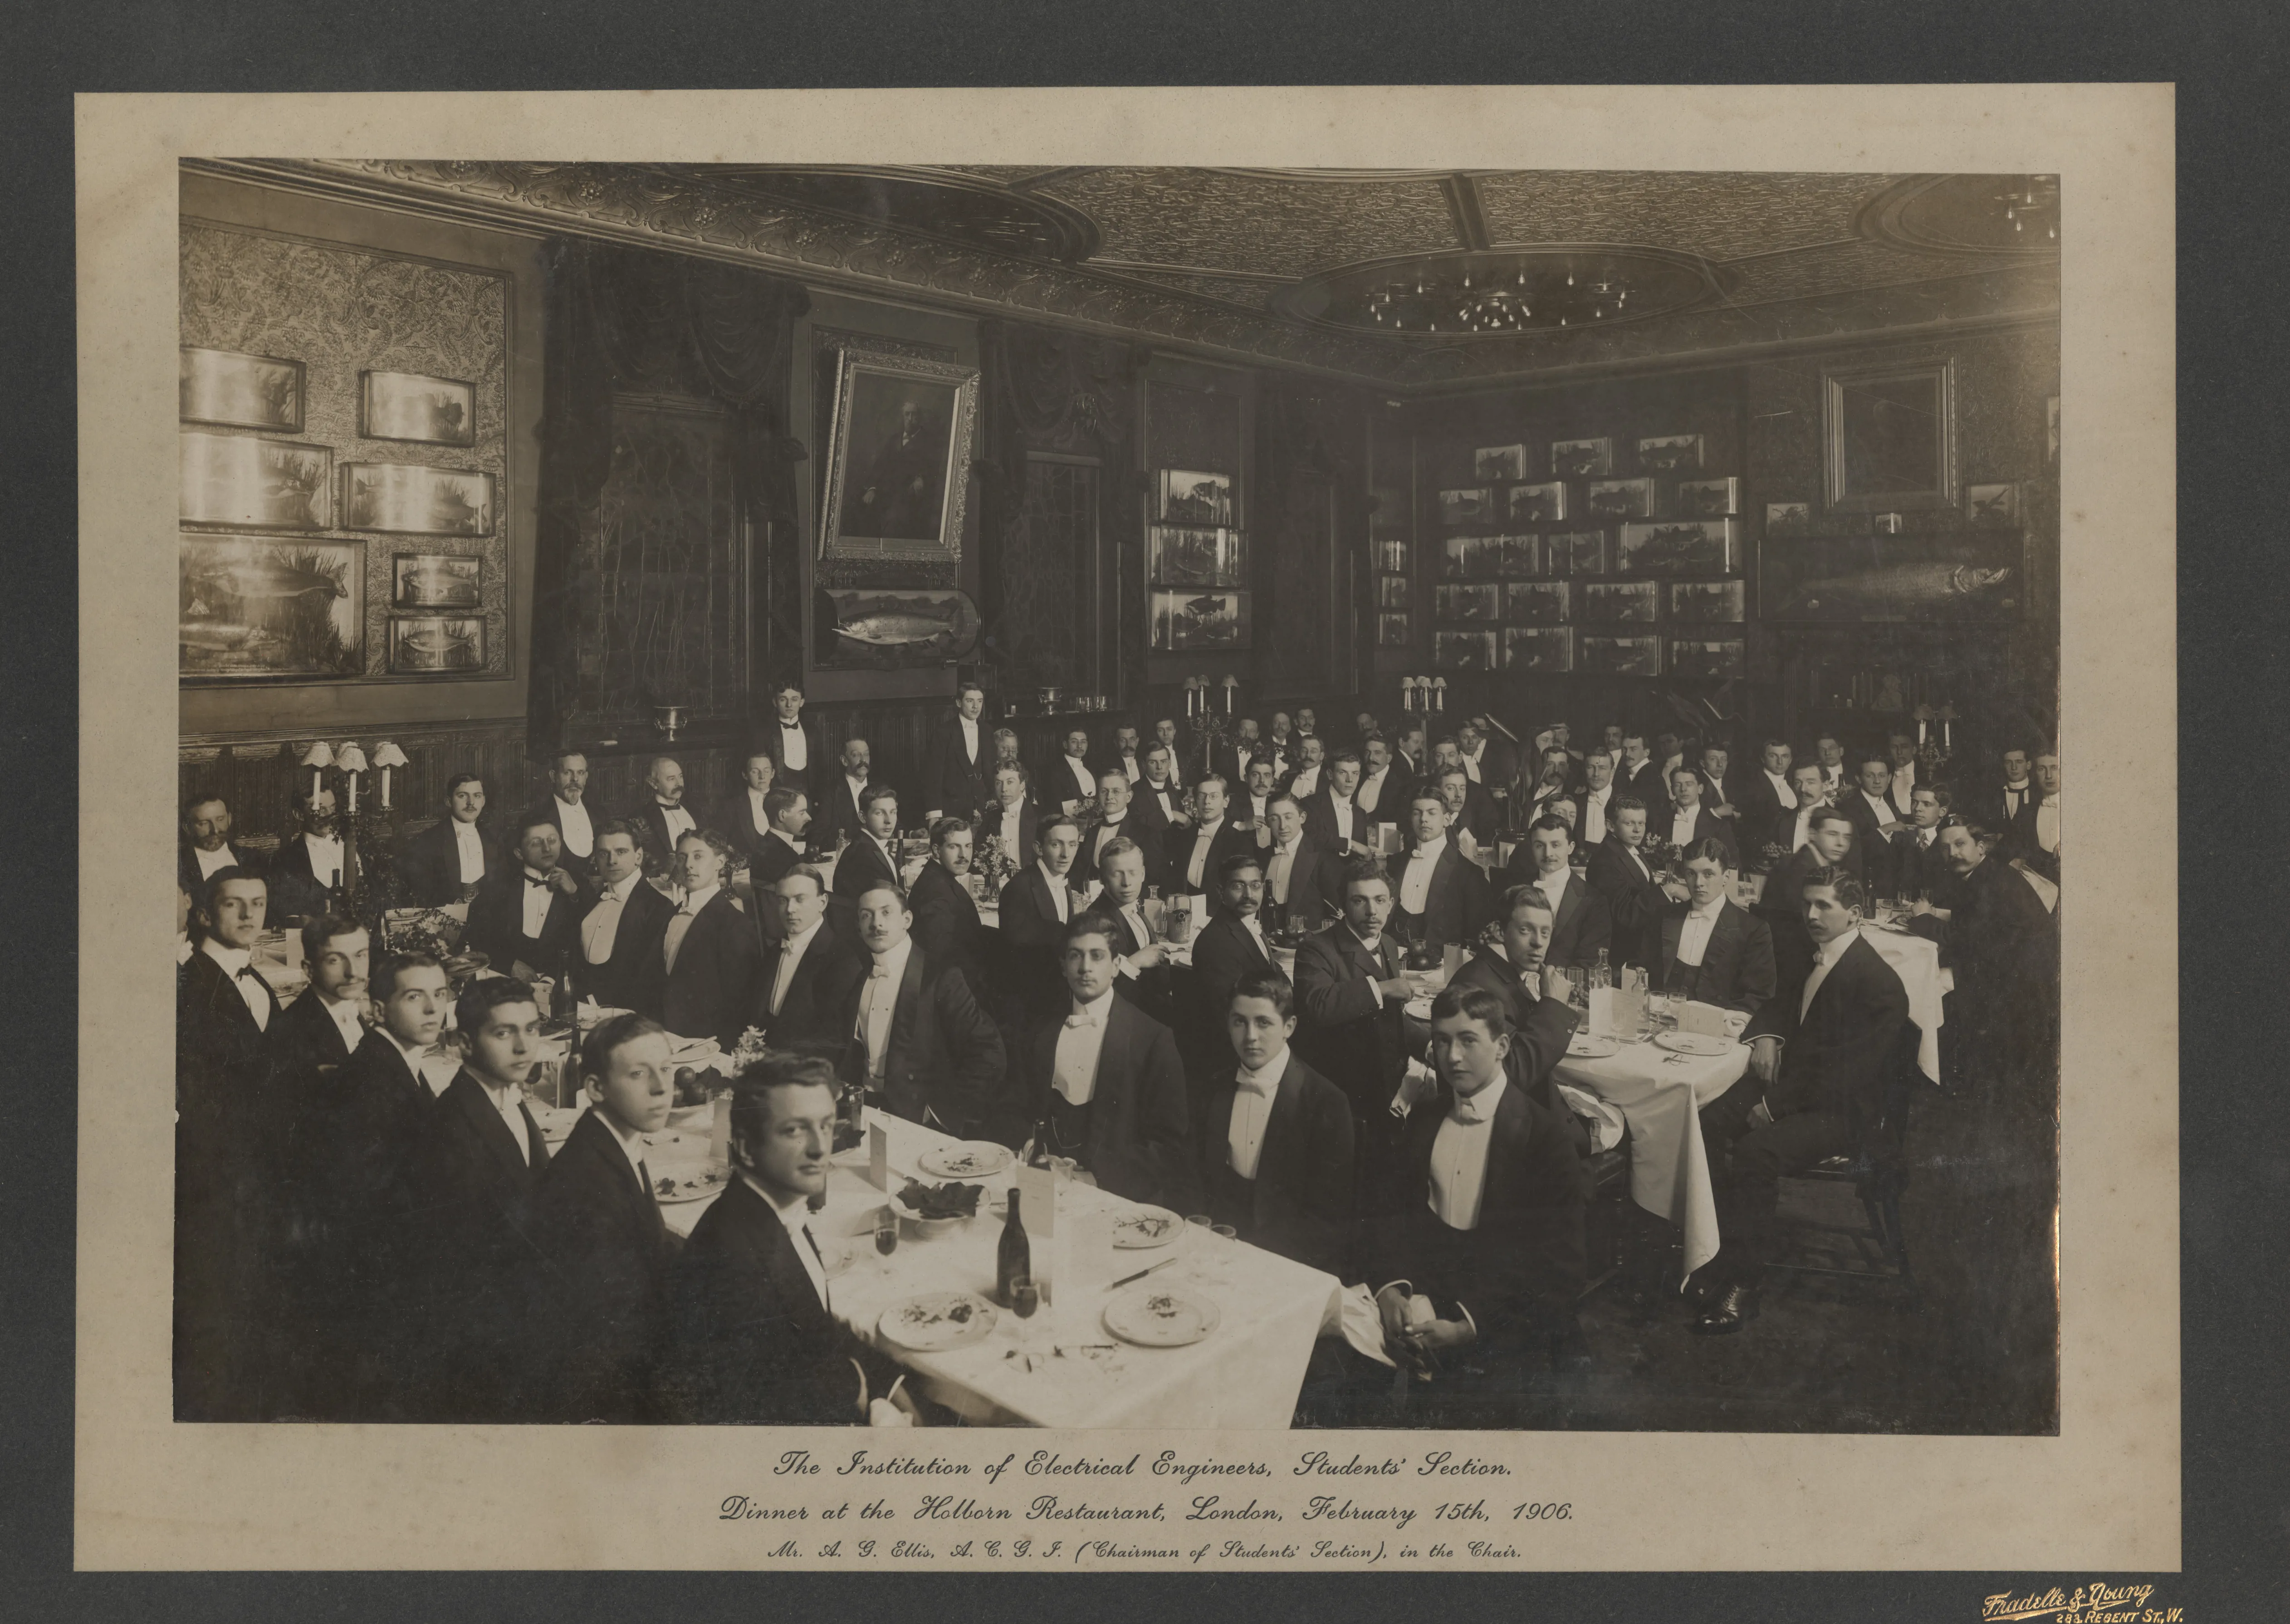 IEE Student Section annual dinner 1906